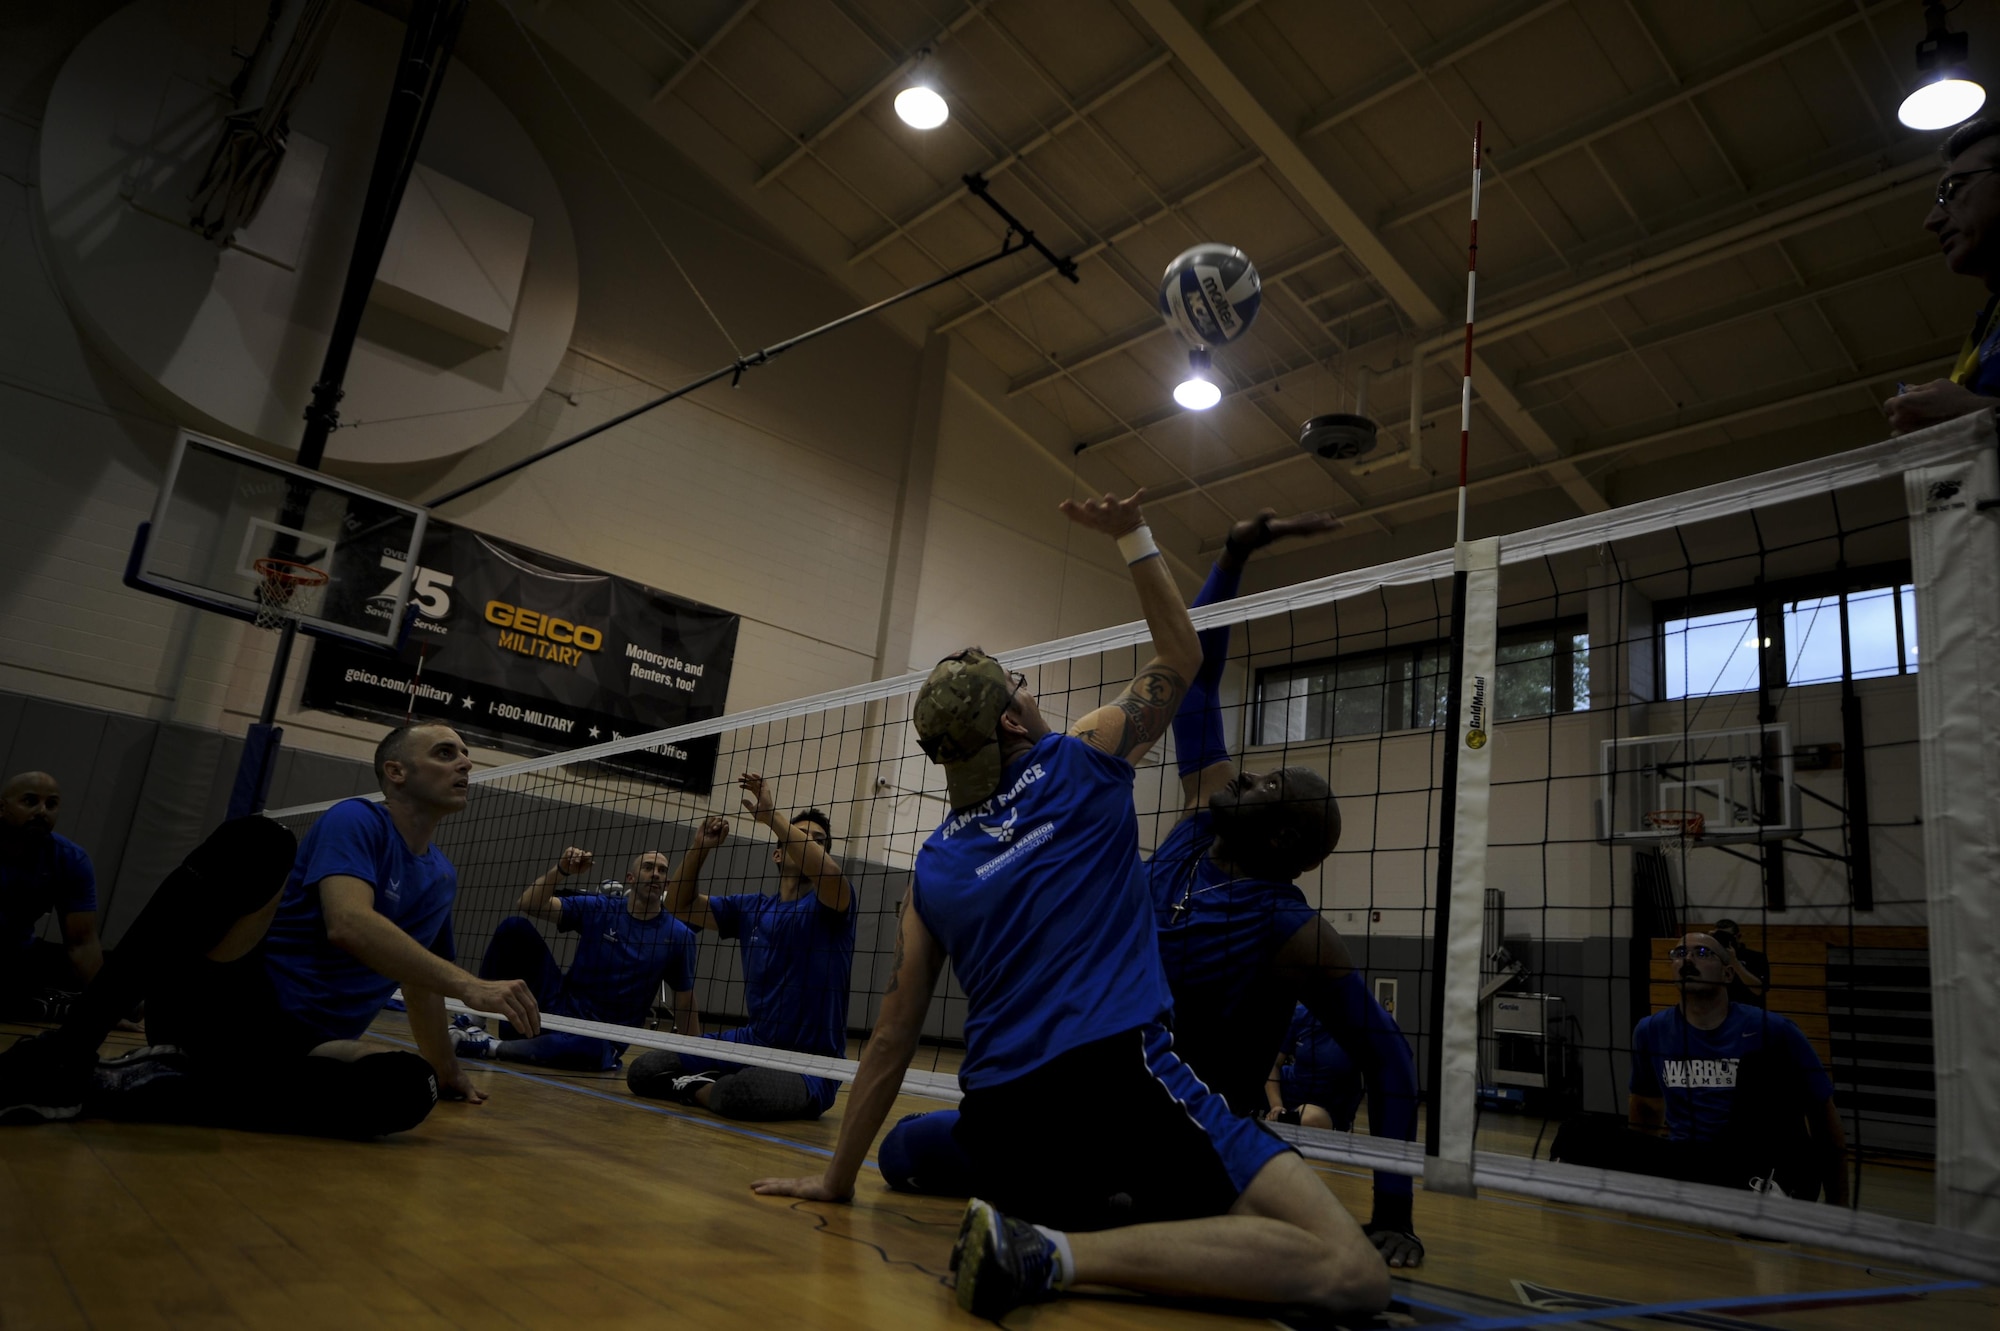 Members of the Air Force sitting volleyball team participate in a scrimage at Hurlburt Field, Fla., April 24, 2017. The scrimmage occurred during the first official practice of the 2017 season. (U.S. Air Force photo by Airman 1st Class Dennis Spain)